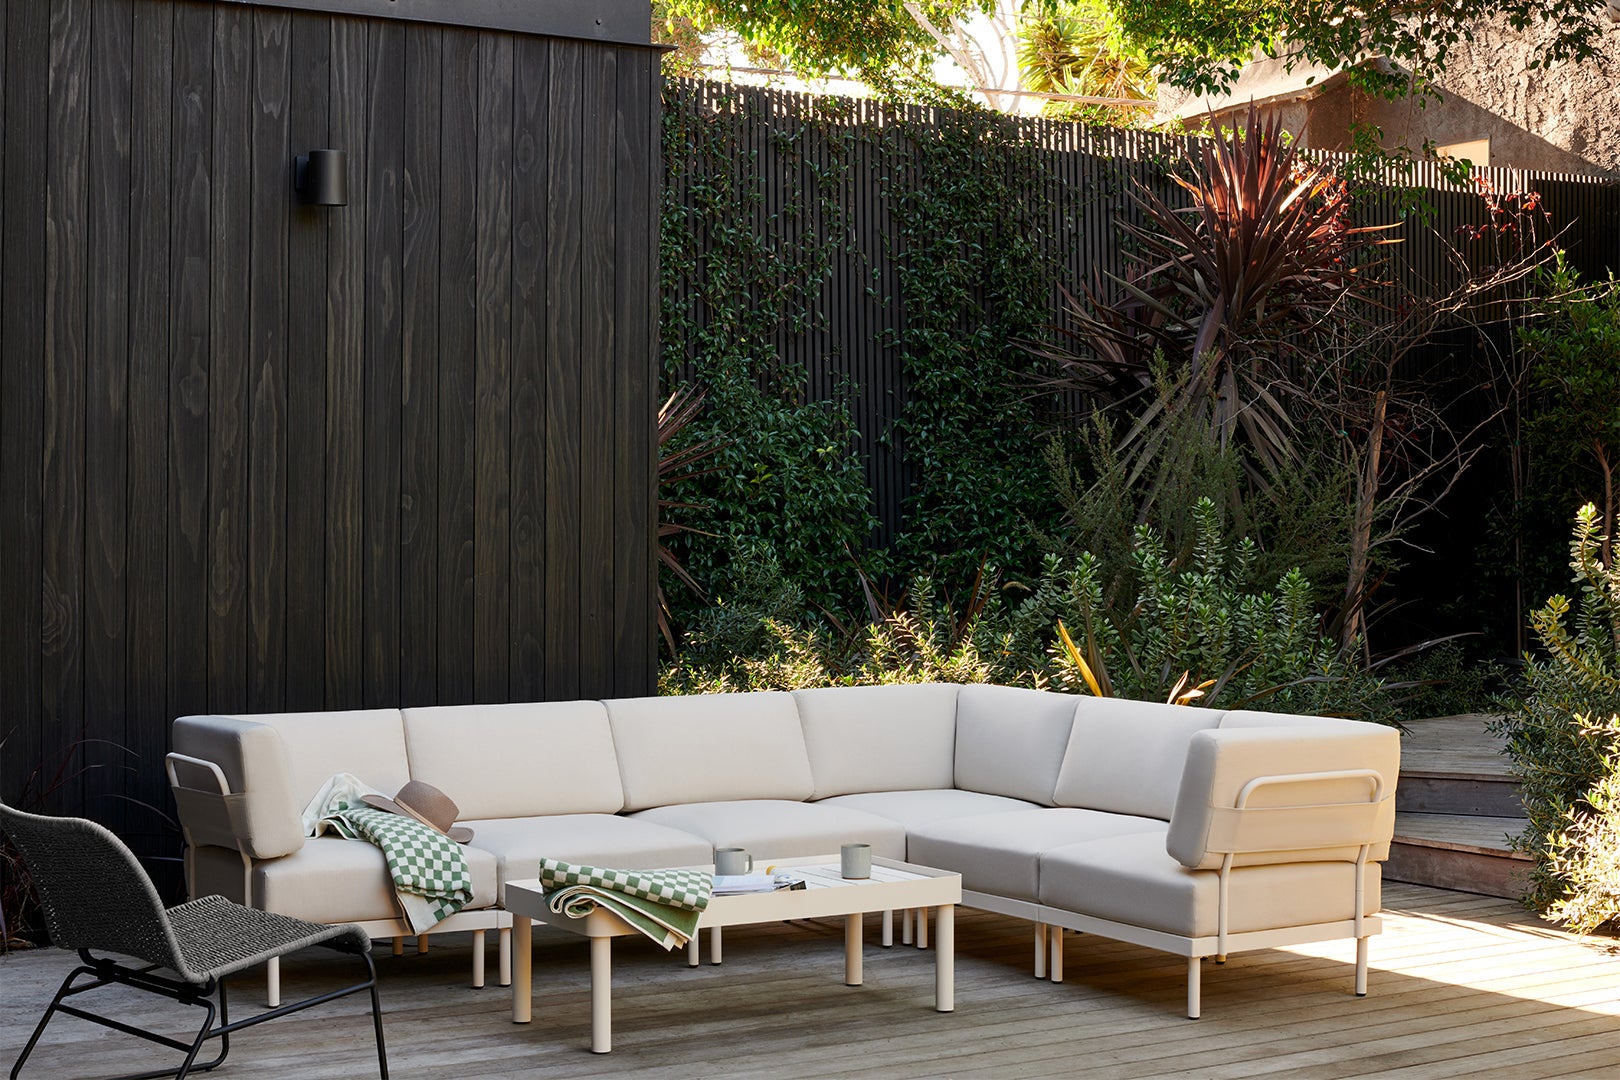 gray L-shaped outdoor sectional